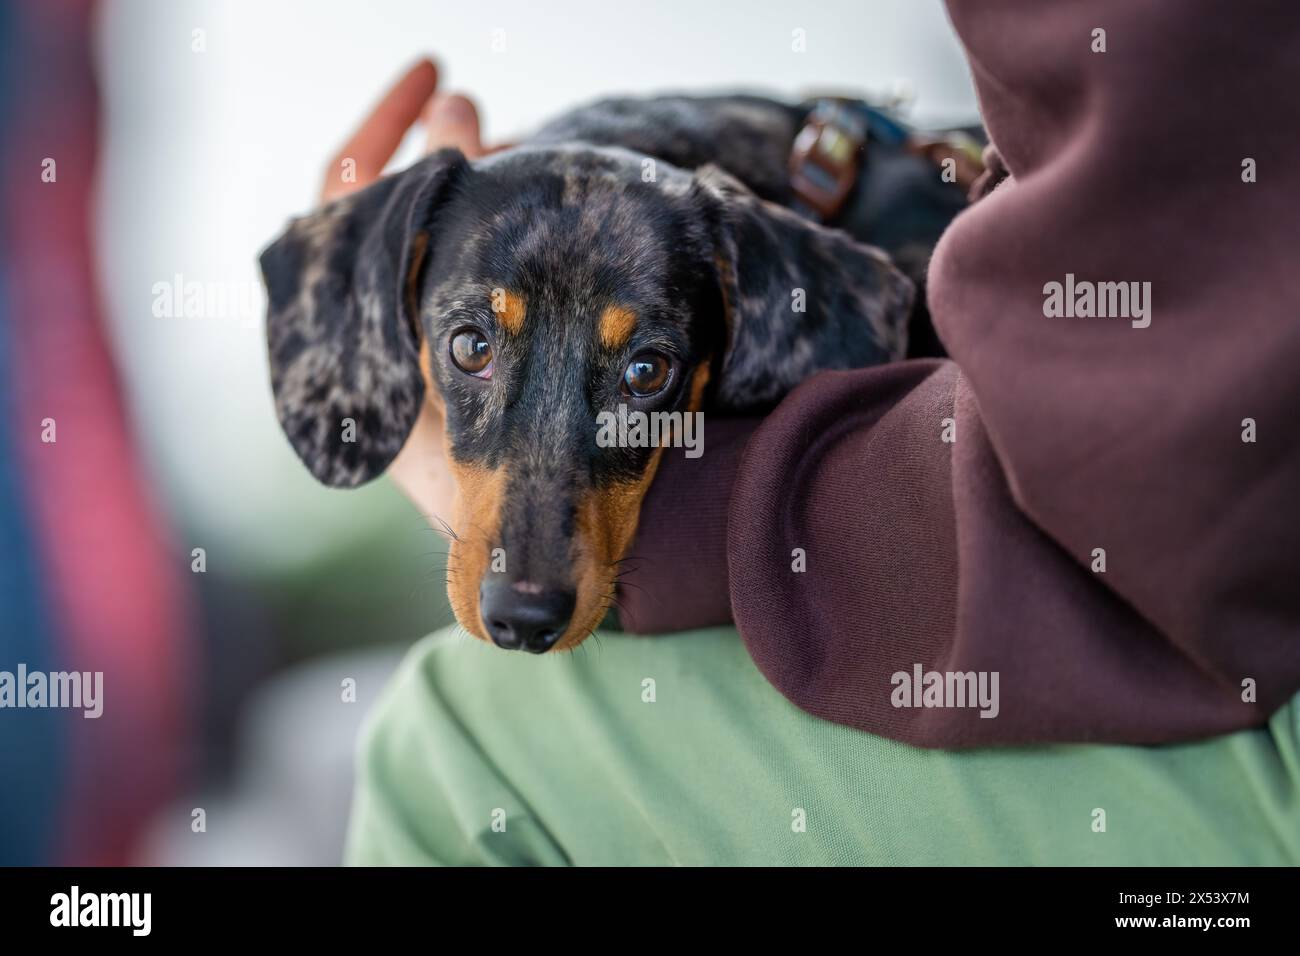 A black and tan miniature dachshund with brindle markings lying on the lap of its owner. The dachshund  also known as the wiener dog or sausage dog, Stock Photo